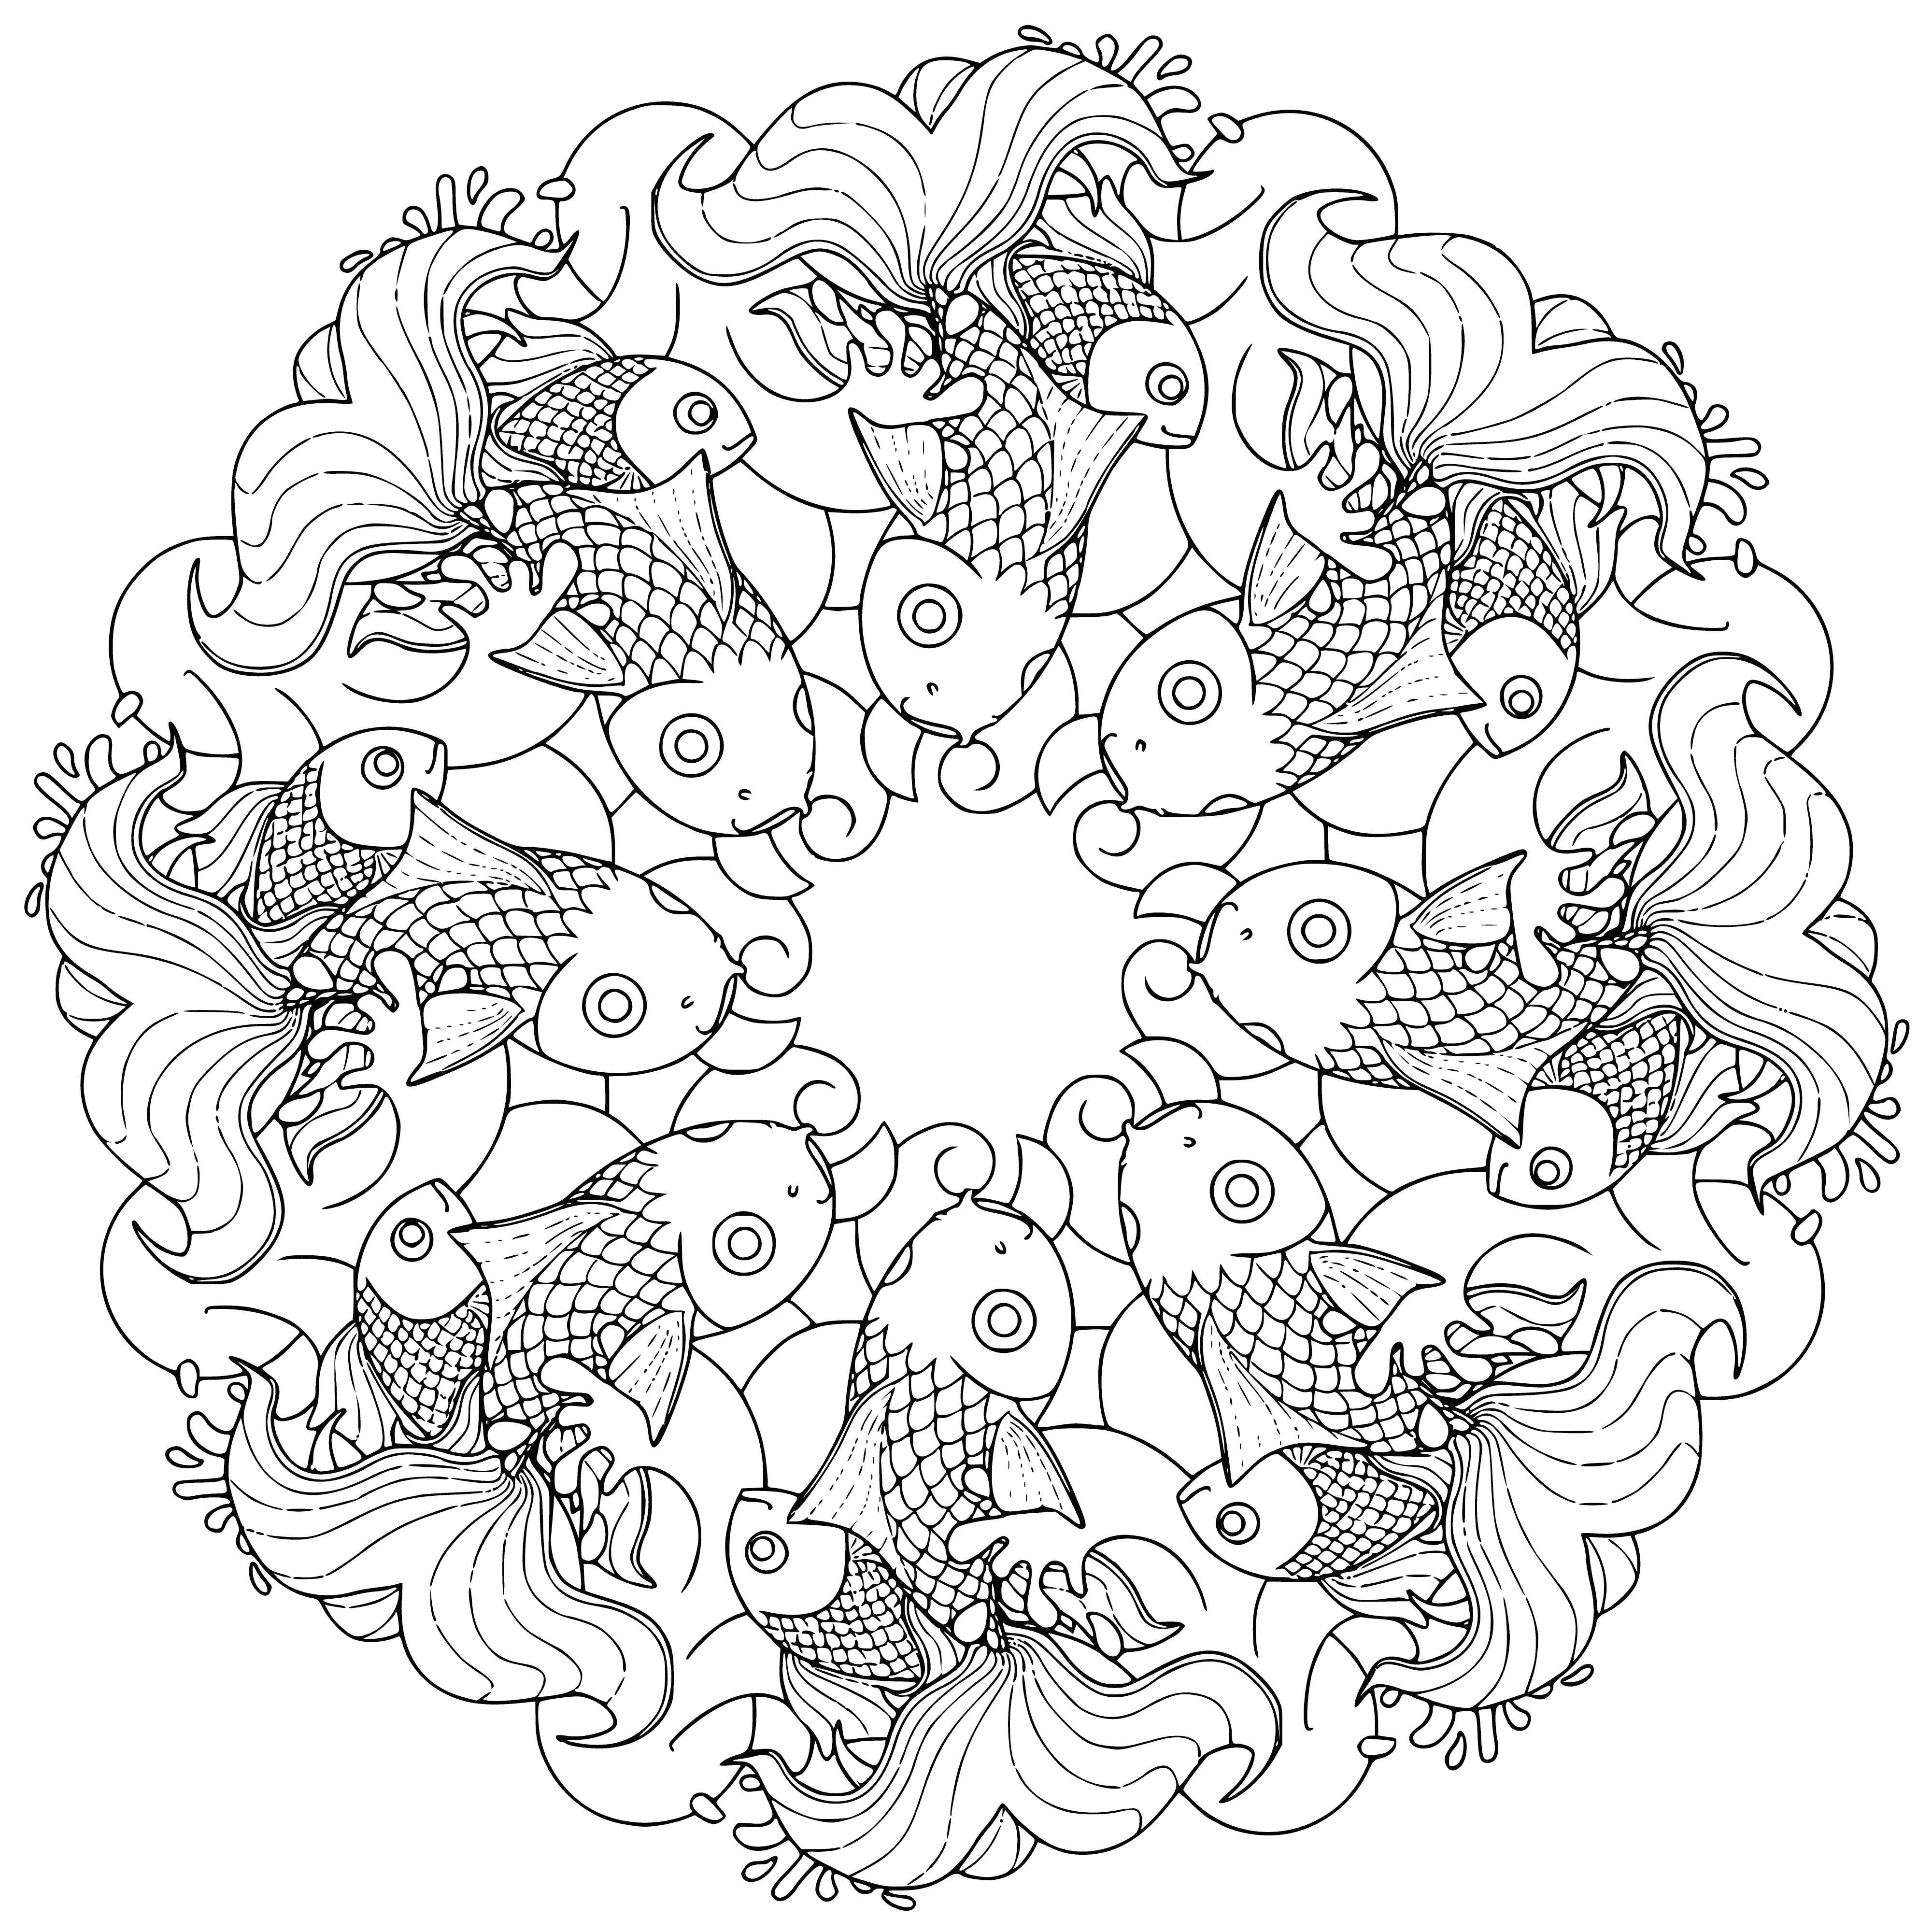 coloring page: Adults relax and de-stress by looking at a mandala featuring a central goldfish, and complex soothing shapes and colors.